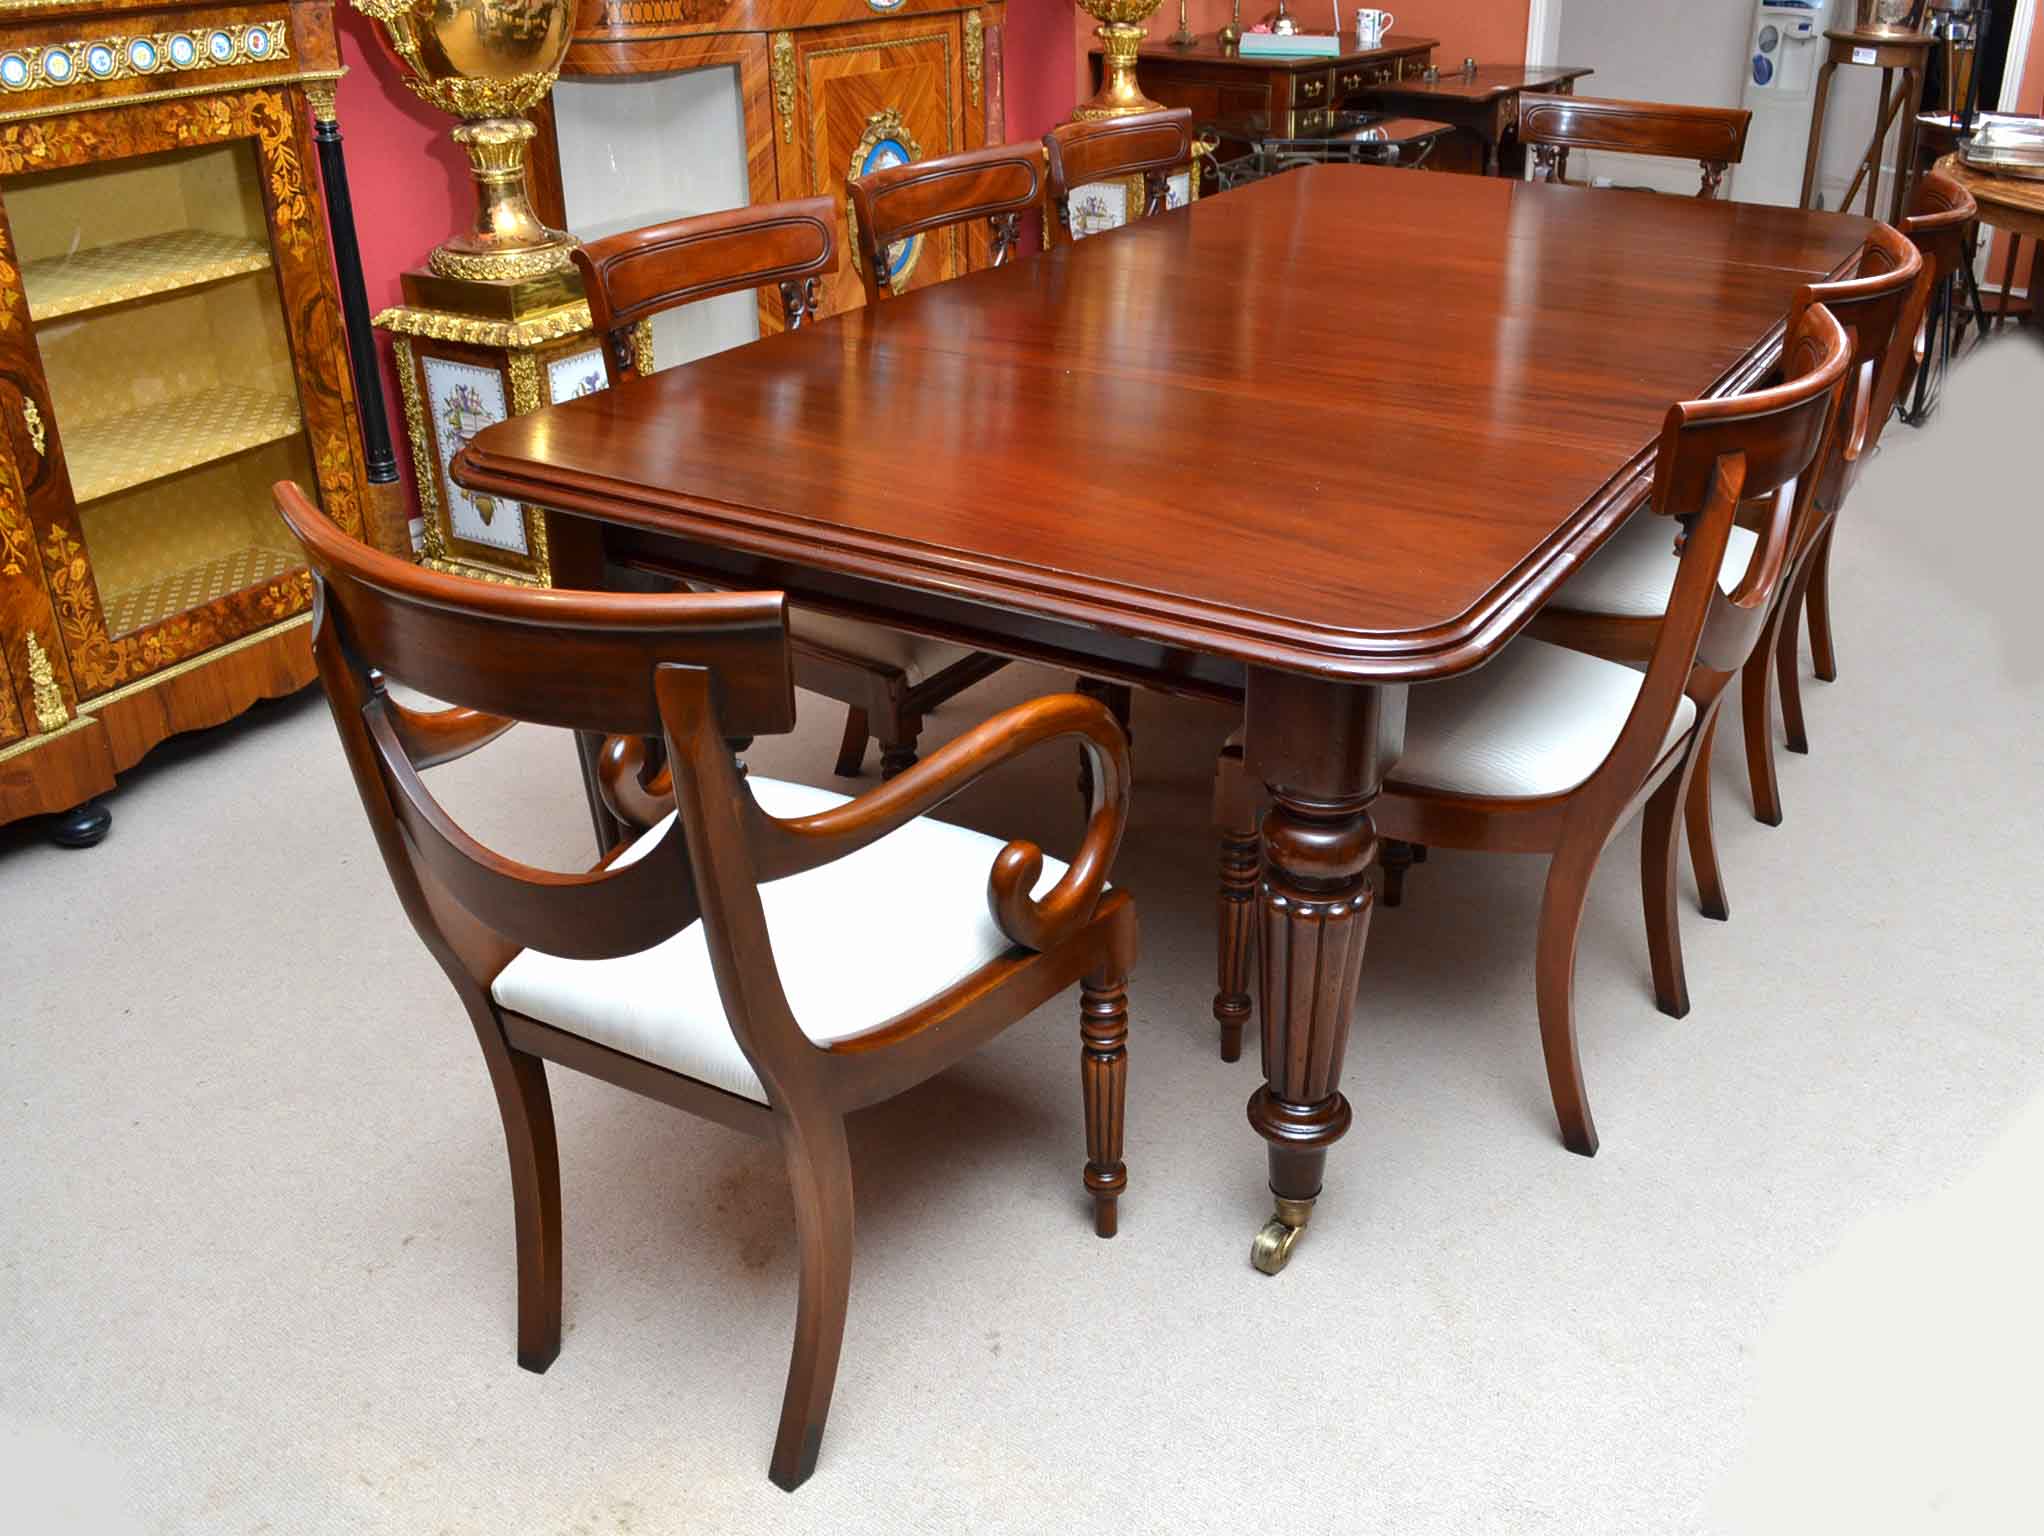 Dining Room Tables And Chairs In Alpharetta Georgia